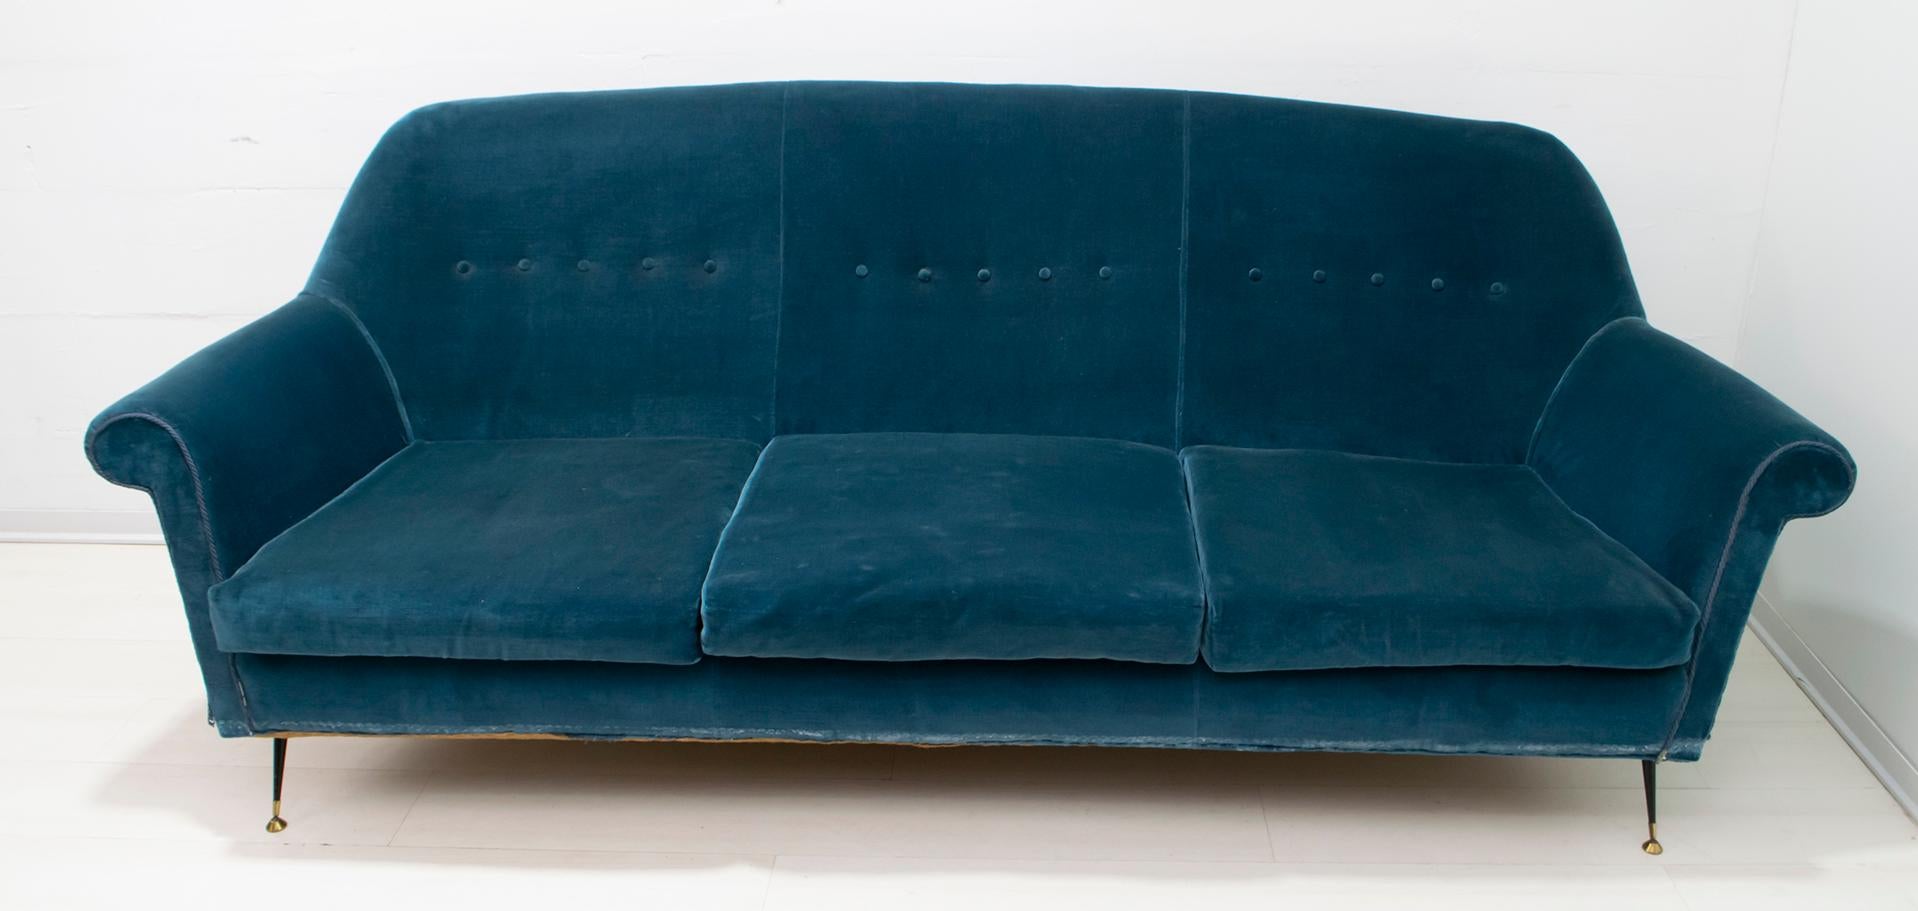 Sofa designed by Gigi Radice for Minotti. Made with solid wood structure and blue velvet covering and legs in brass and black lacquered metal. It is recommended to replace the lining, as shown in the photo is worn.
